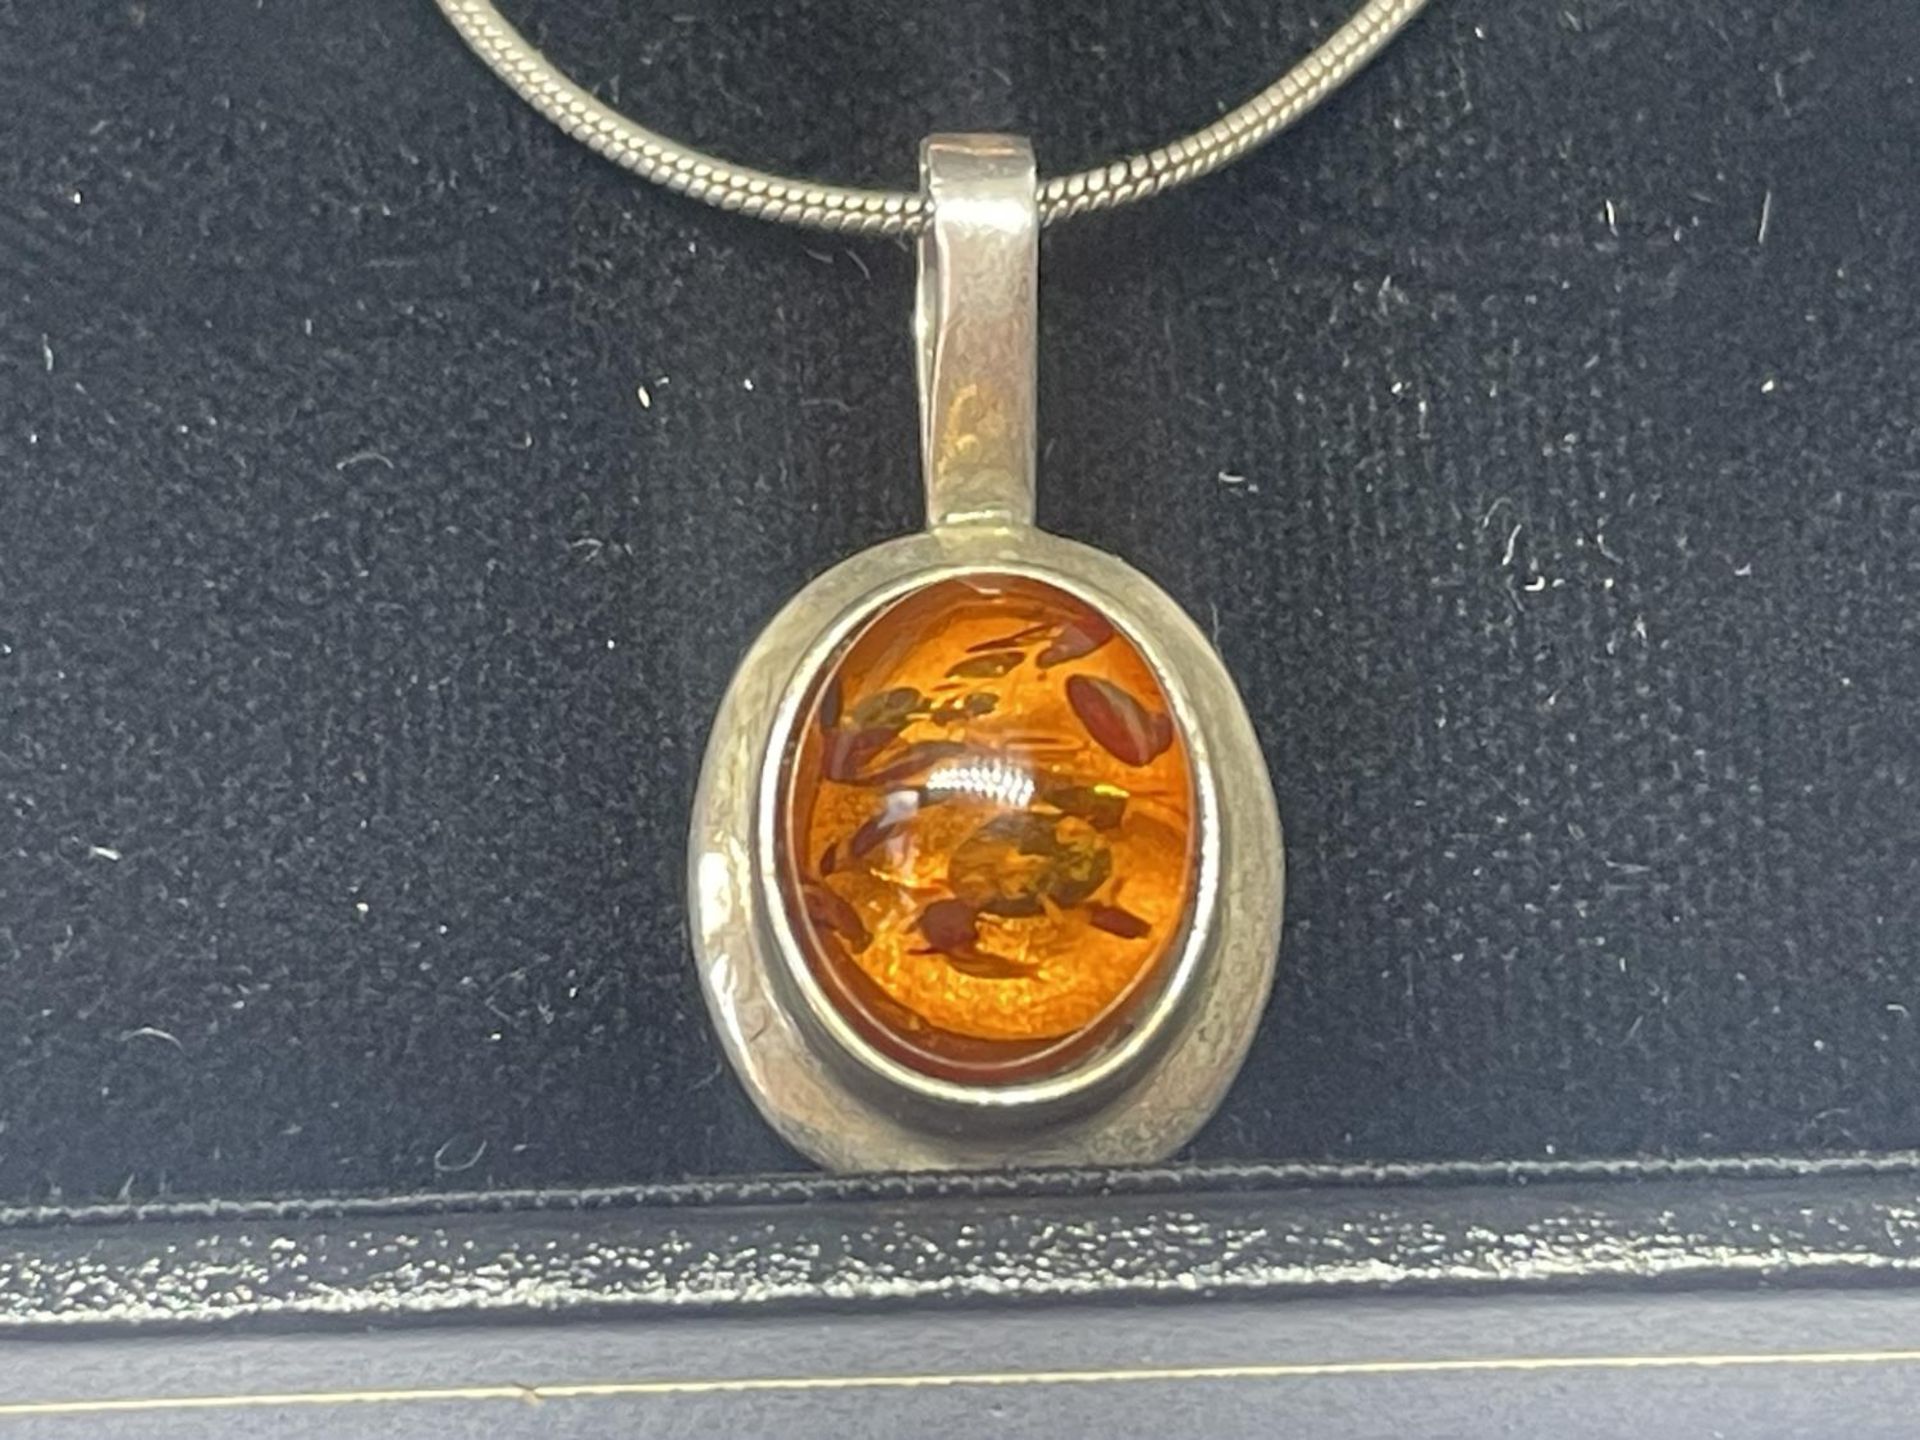 A SILVER AND AMBER NECKLACE AND BROOCH IN A PRESENTATION BOX - Image 3 of 3